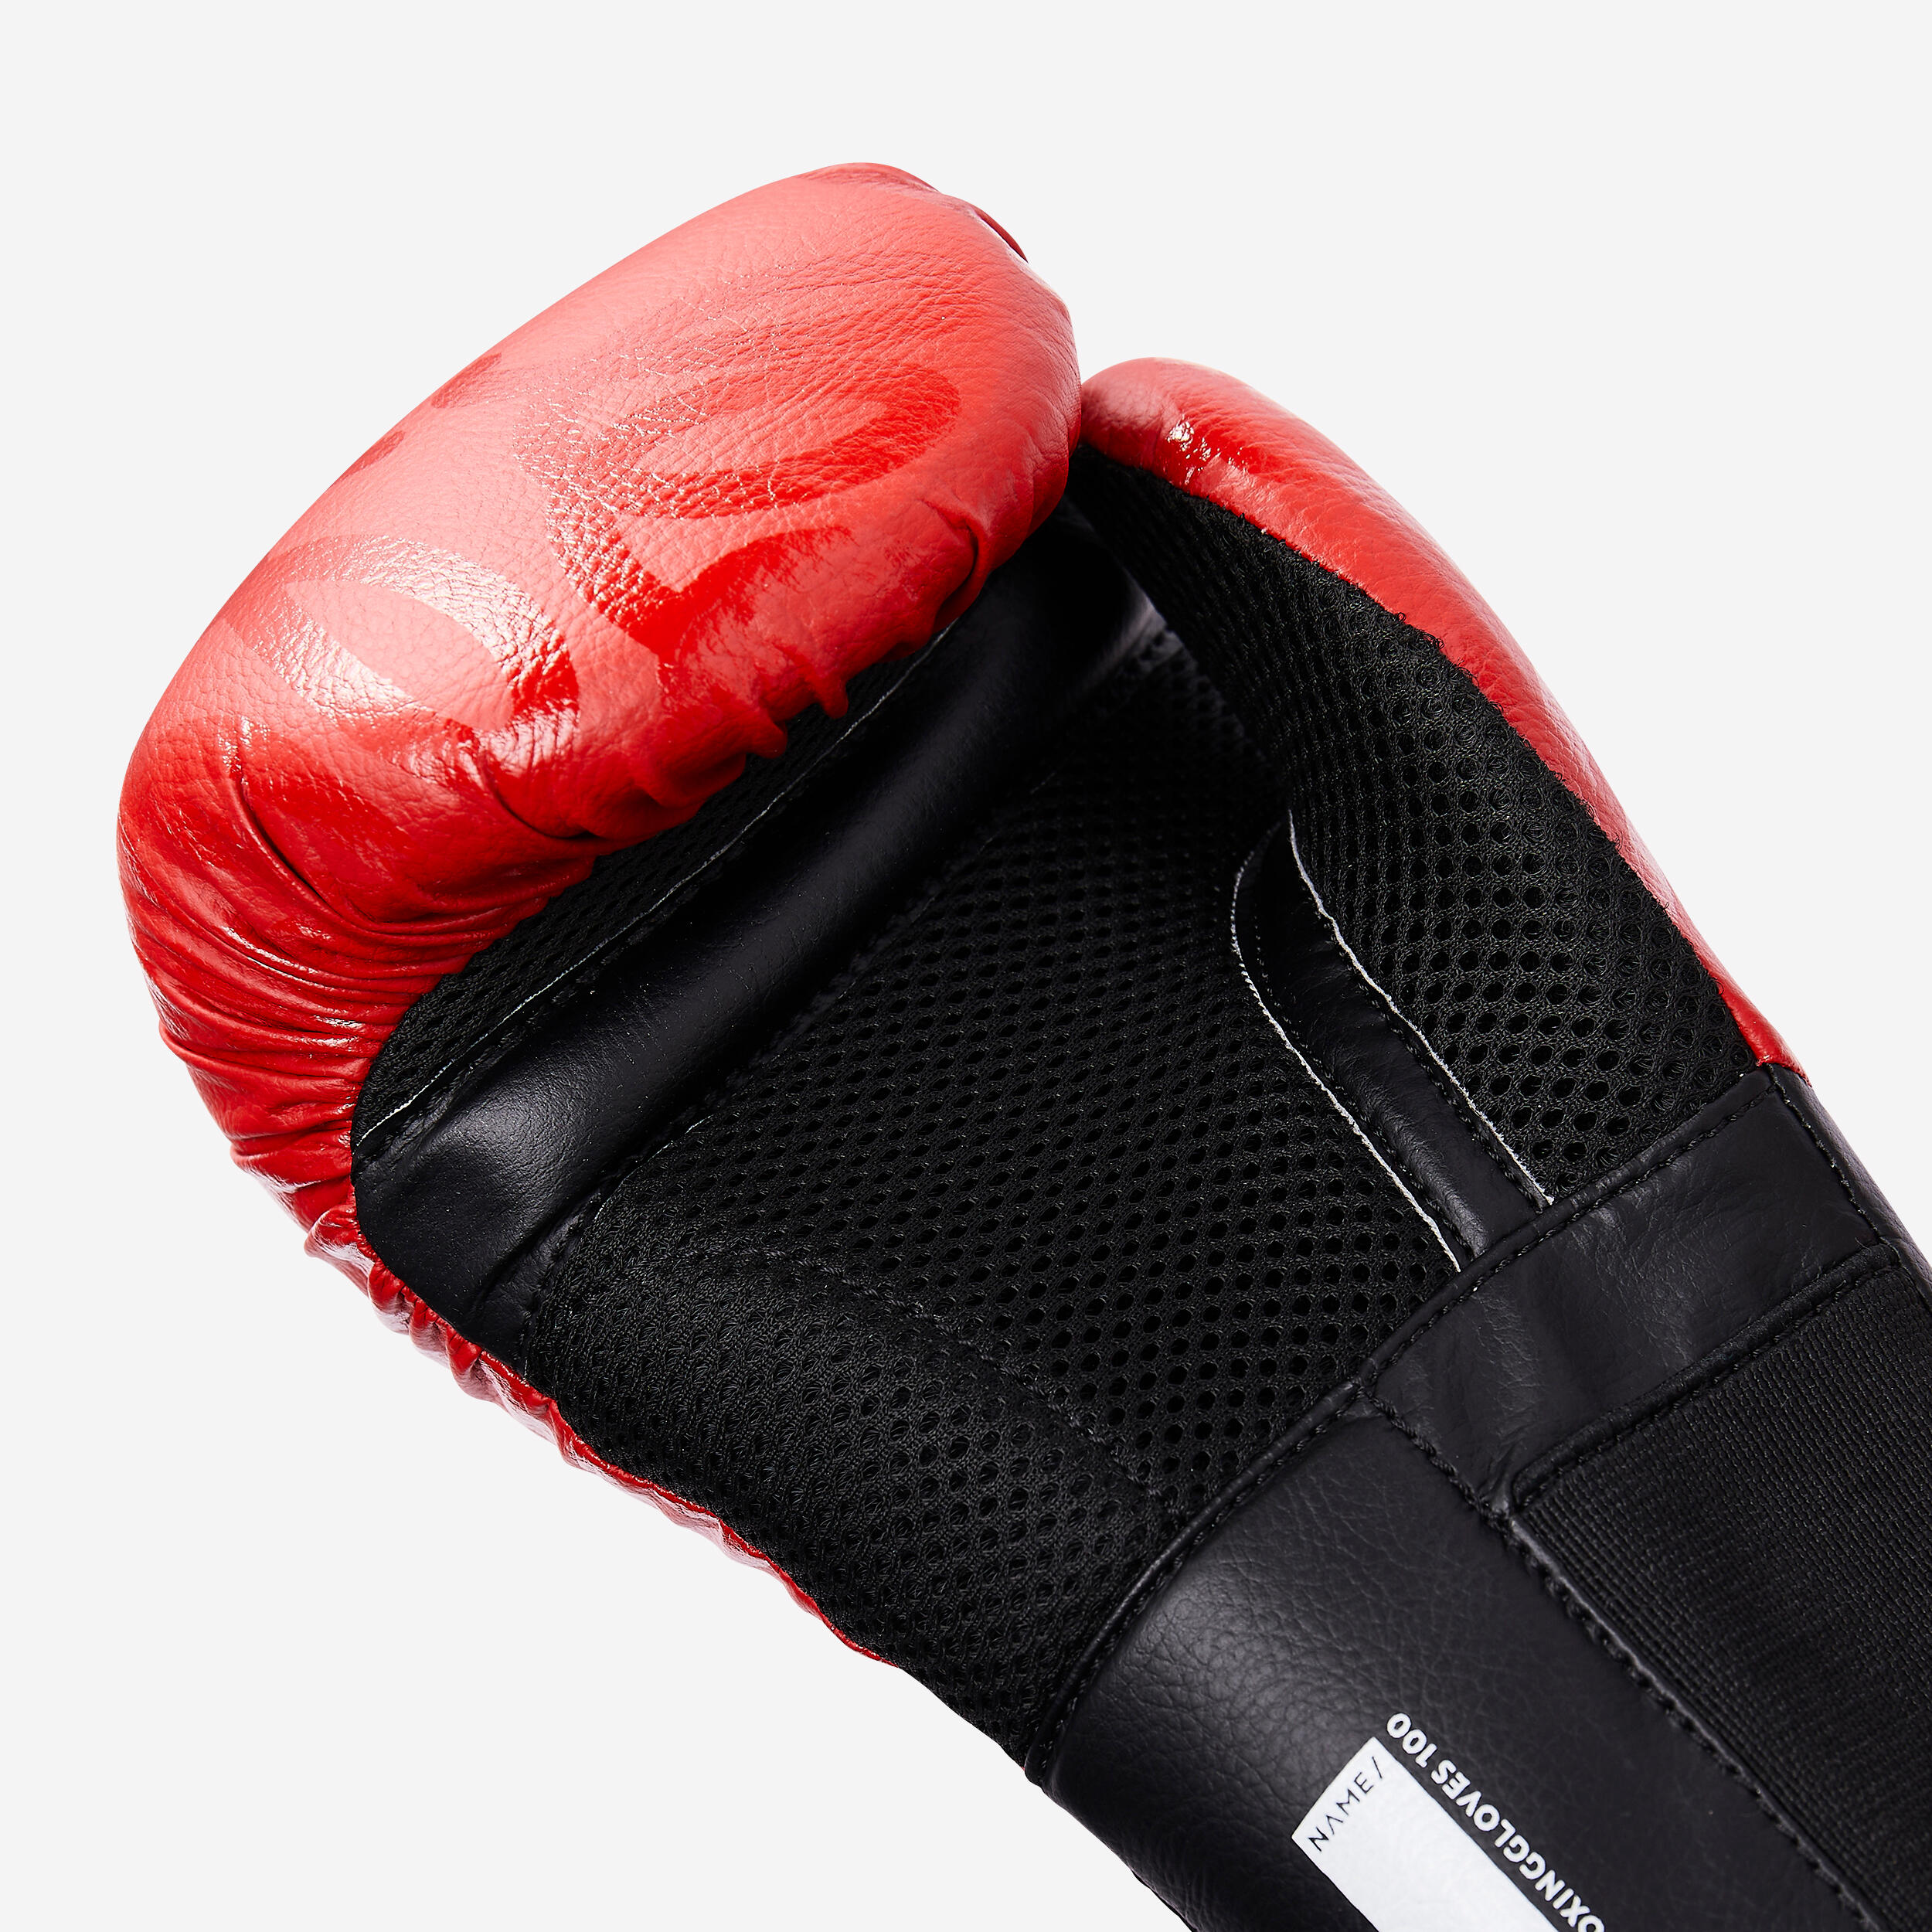 Kids' Boxing Gloves - Red 4/6